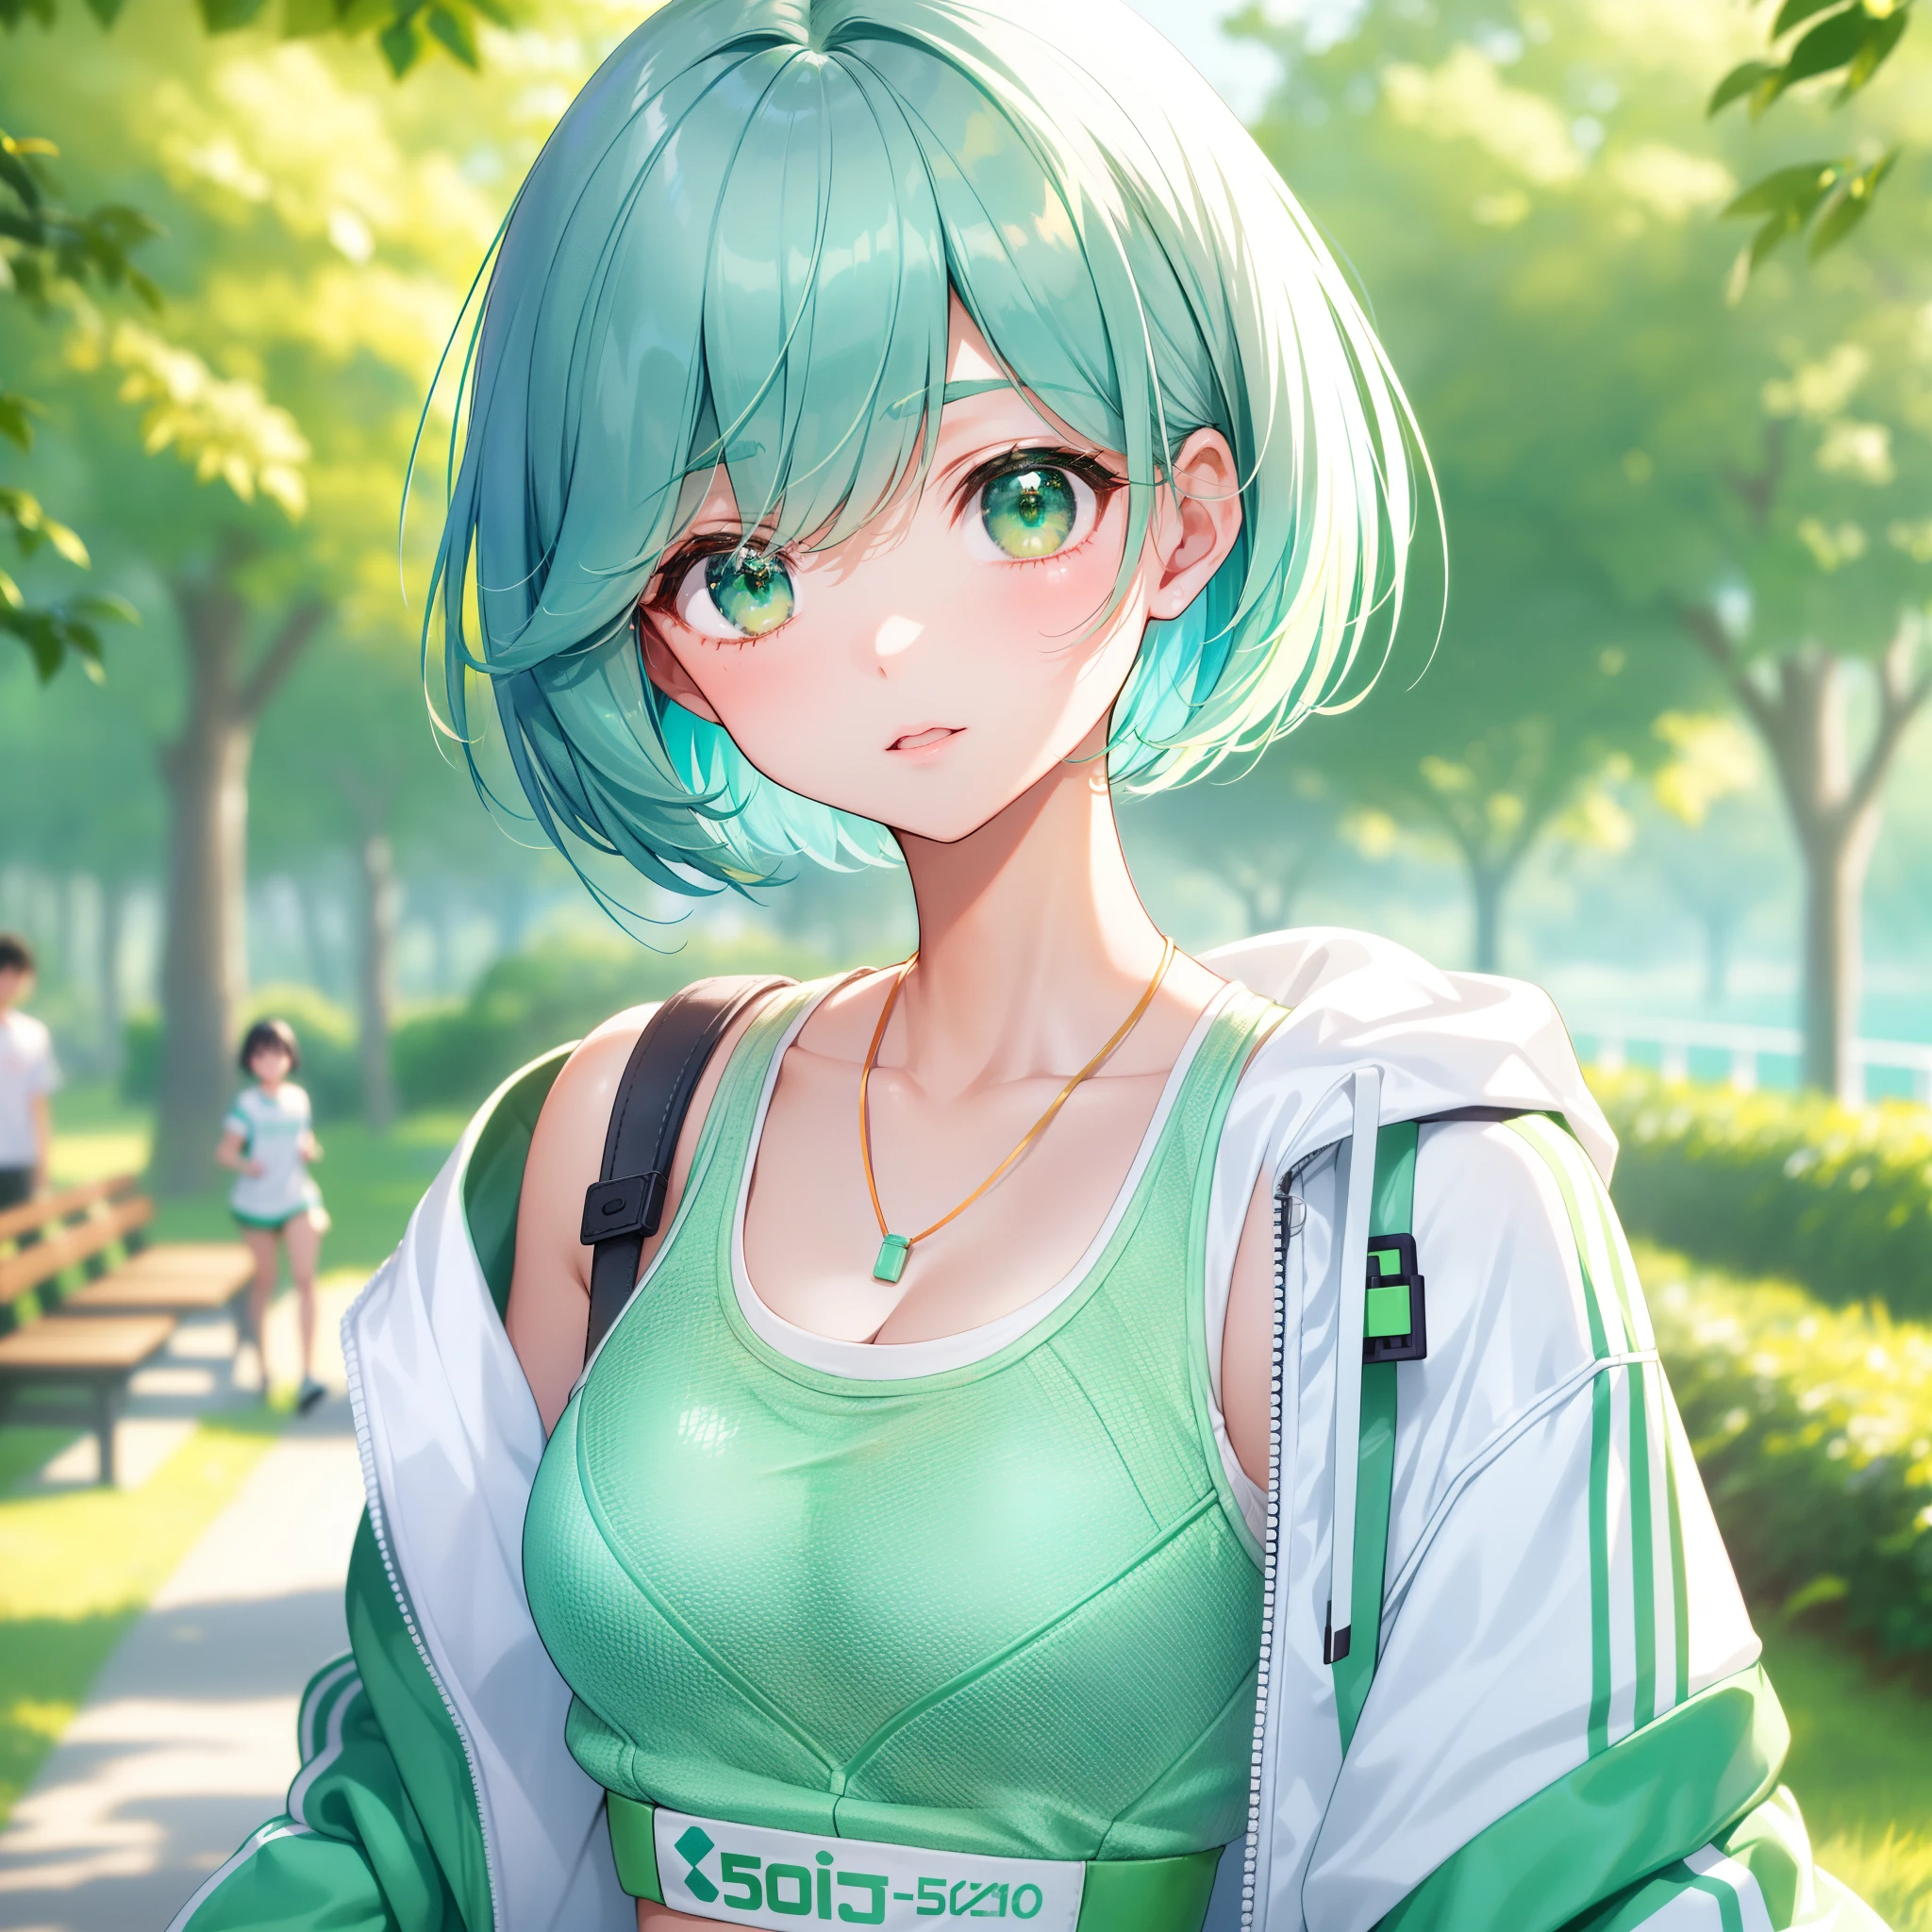 A 15-year-old girl named Mizuha walking in a park. She has bright mint green short hair styled lightly upwards in the front and vivid green eyes. She's 154 cm tall with an athletic build. Mizuha is wearing a sporty and casual outfit, primarily in mint green and white, with comfortable sneakers, a jacket, and a sports watch. She exudes a clear, pure expression, embodying her energetic and sociable personality. The scene is vibrant and lively, reflecting her love for outdoor activities.